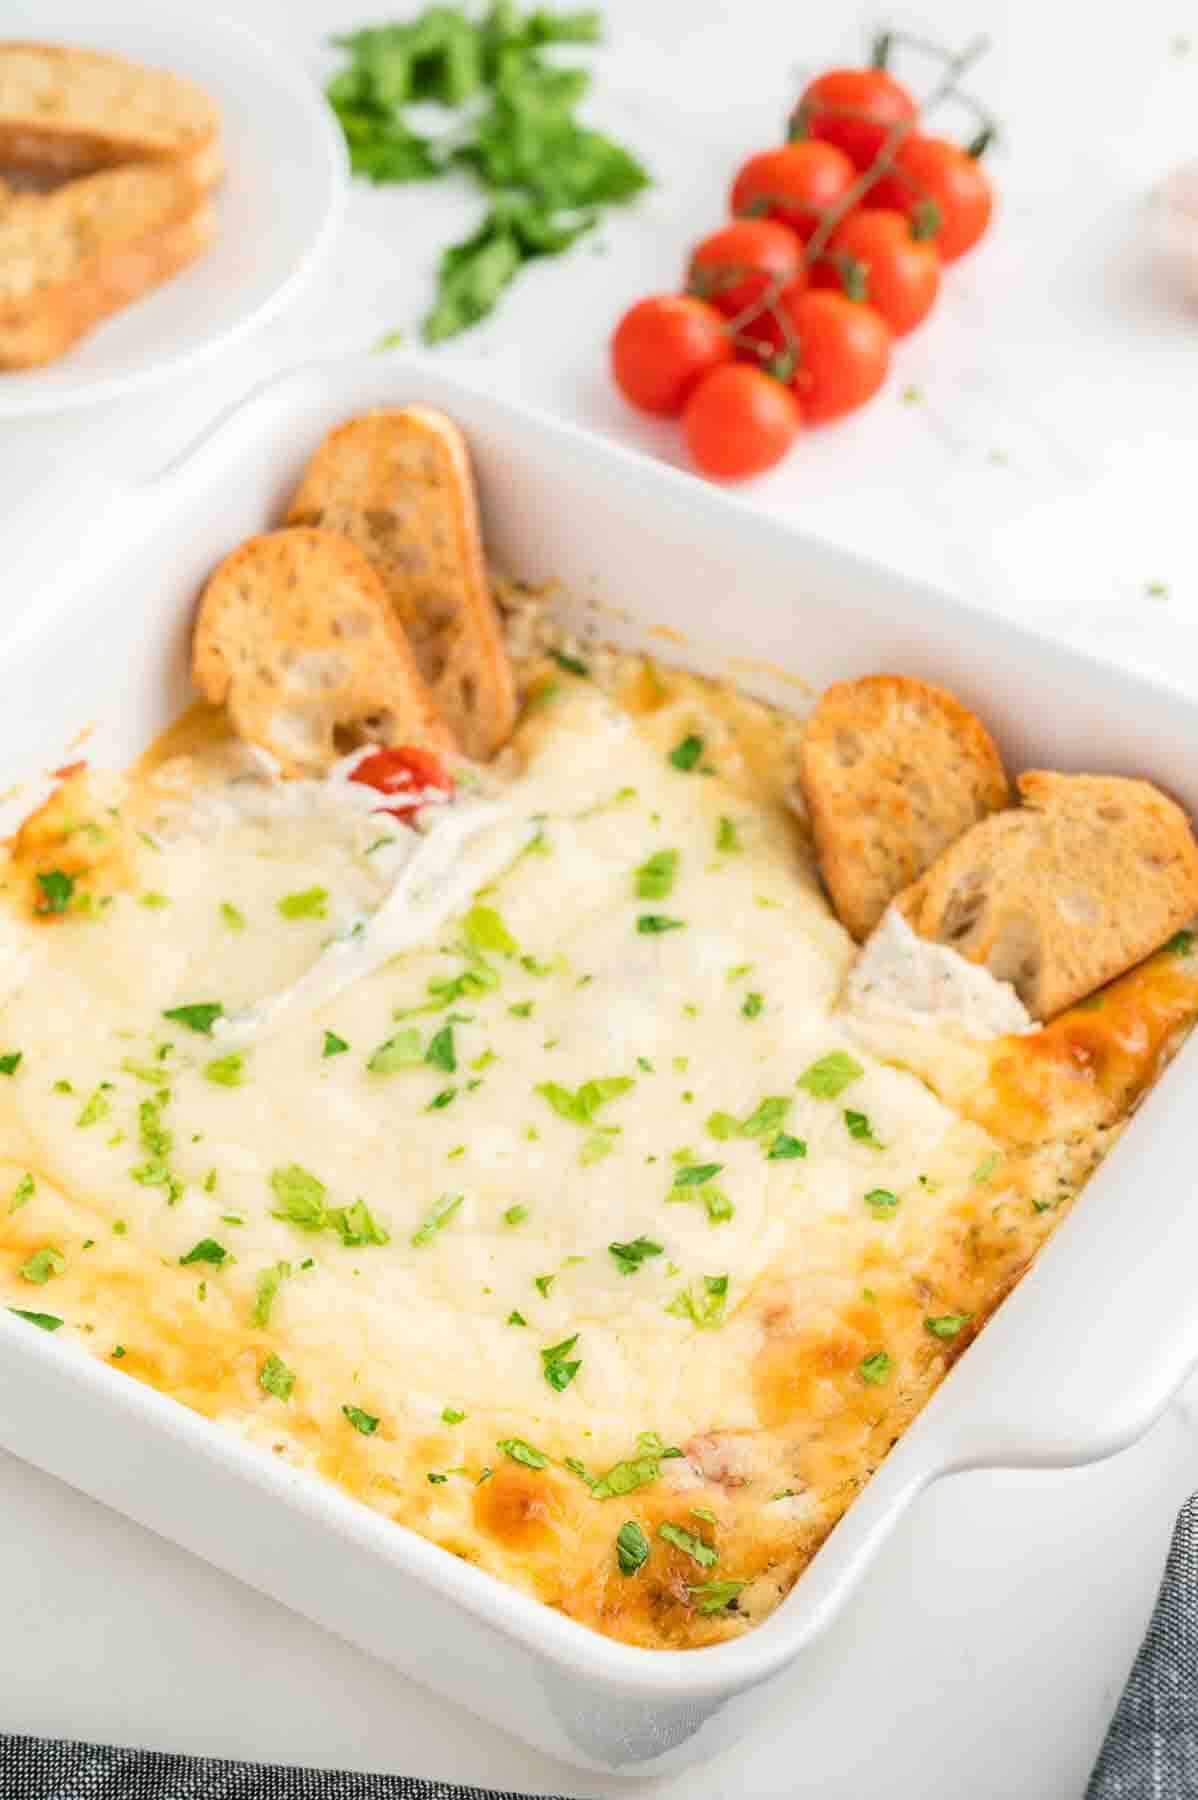 Baked ricotta dip in a white baking dish with crostini on the side.